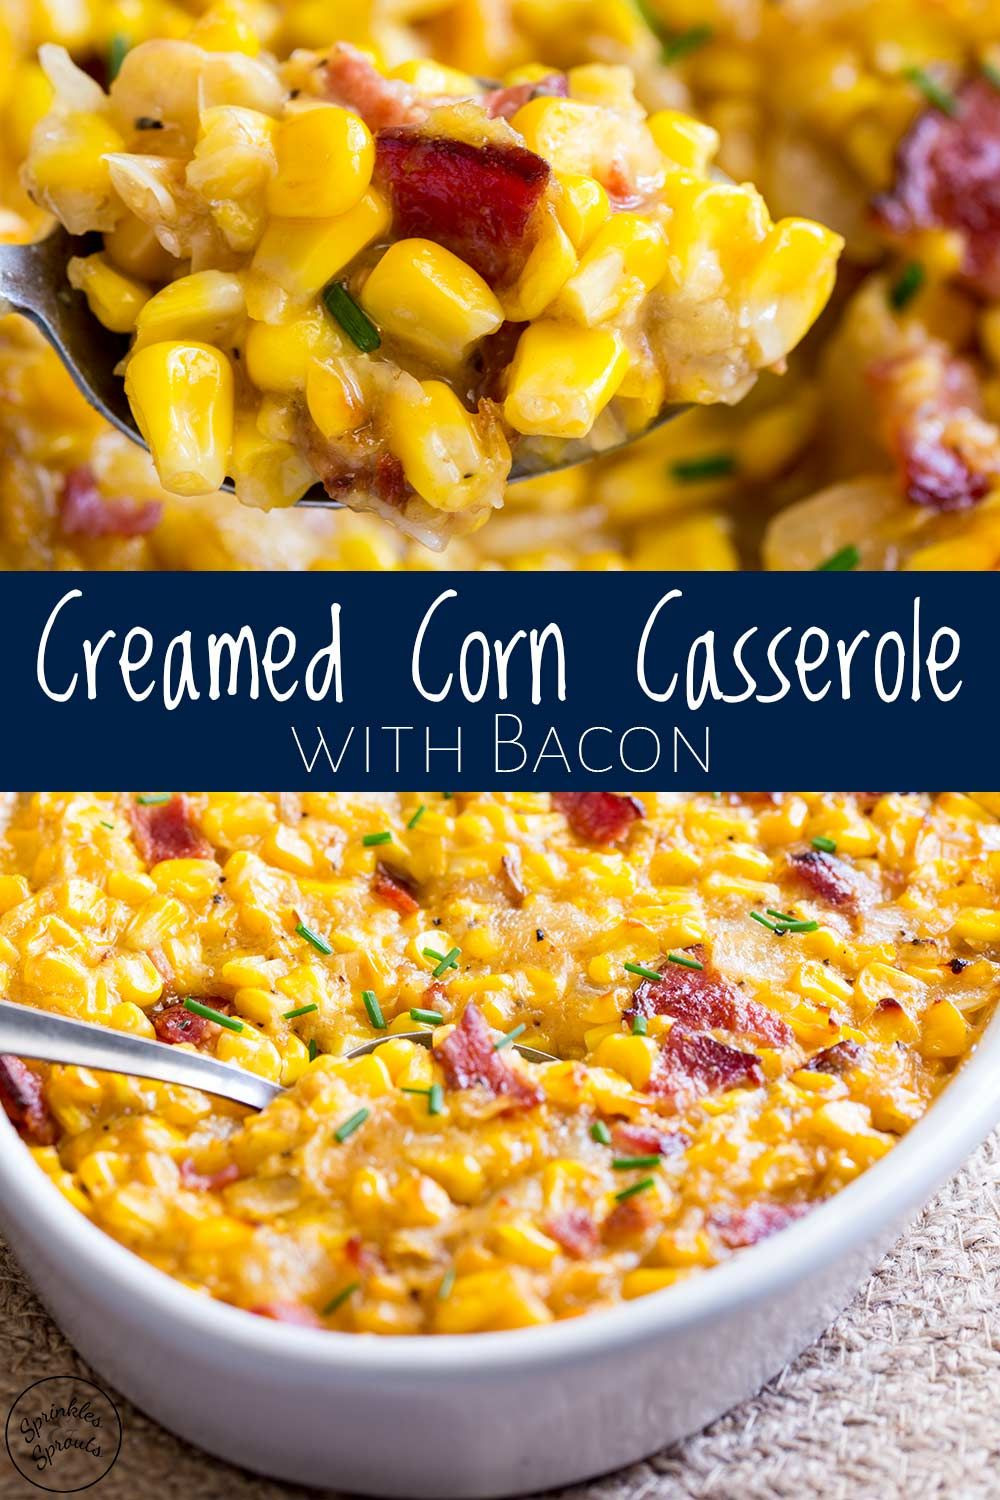 Gluten Free Corn Casserole
 This Baked Creamed Corn Casserole with Bacon is a little